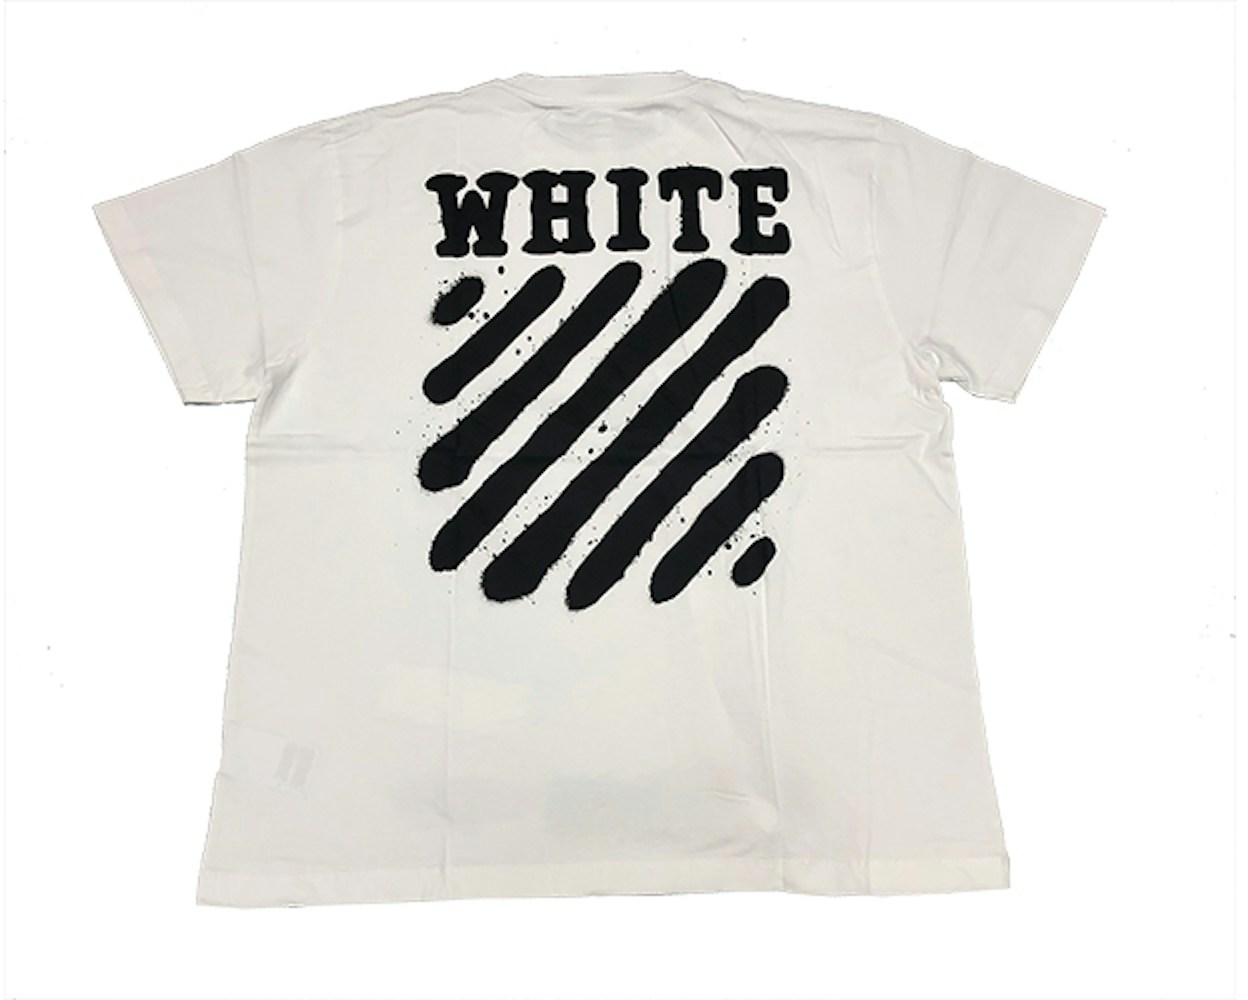 OFF-WHITE Incomplete Spray Paint Tee White